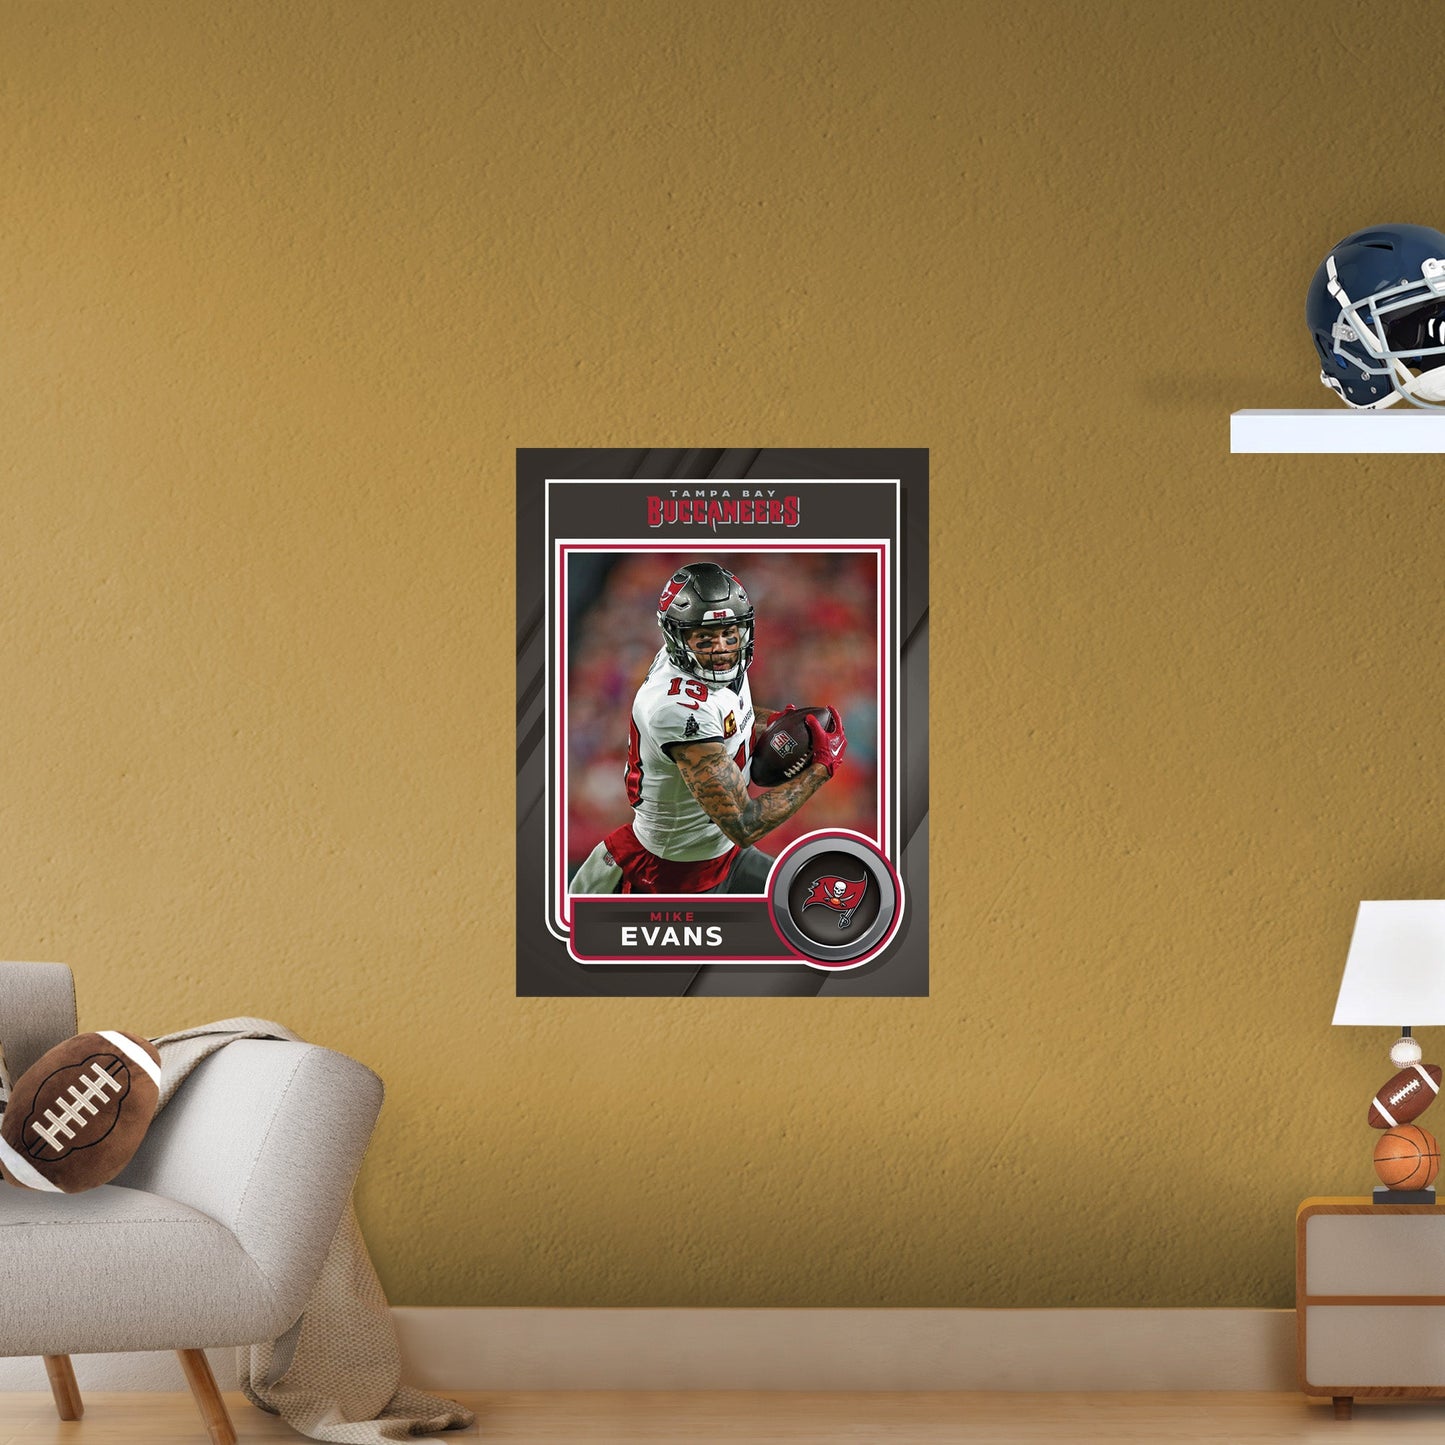 Tampa Bay Buccaneers: Mike Evans Poster - Officially Licensed NFL Removable Adhesive Decal